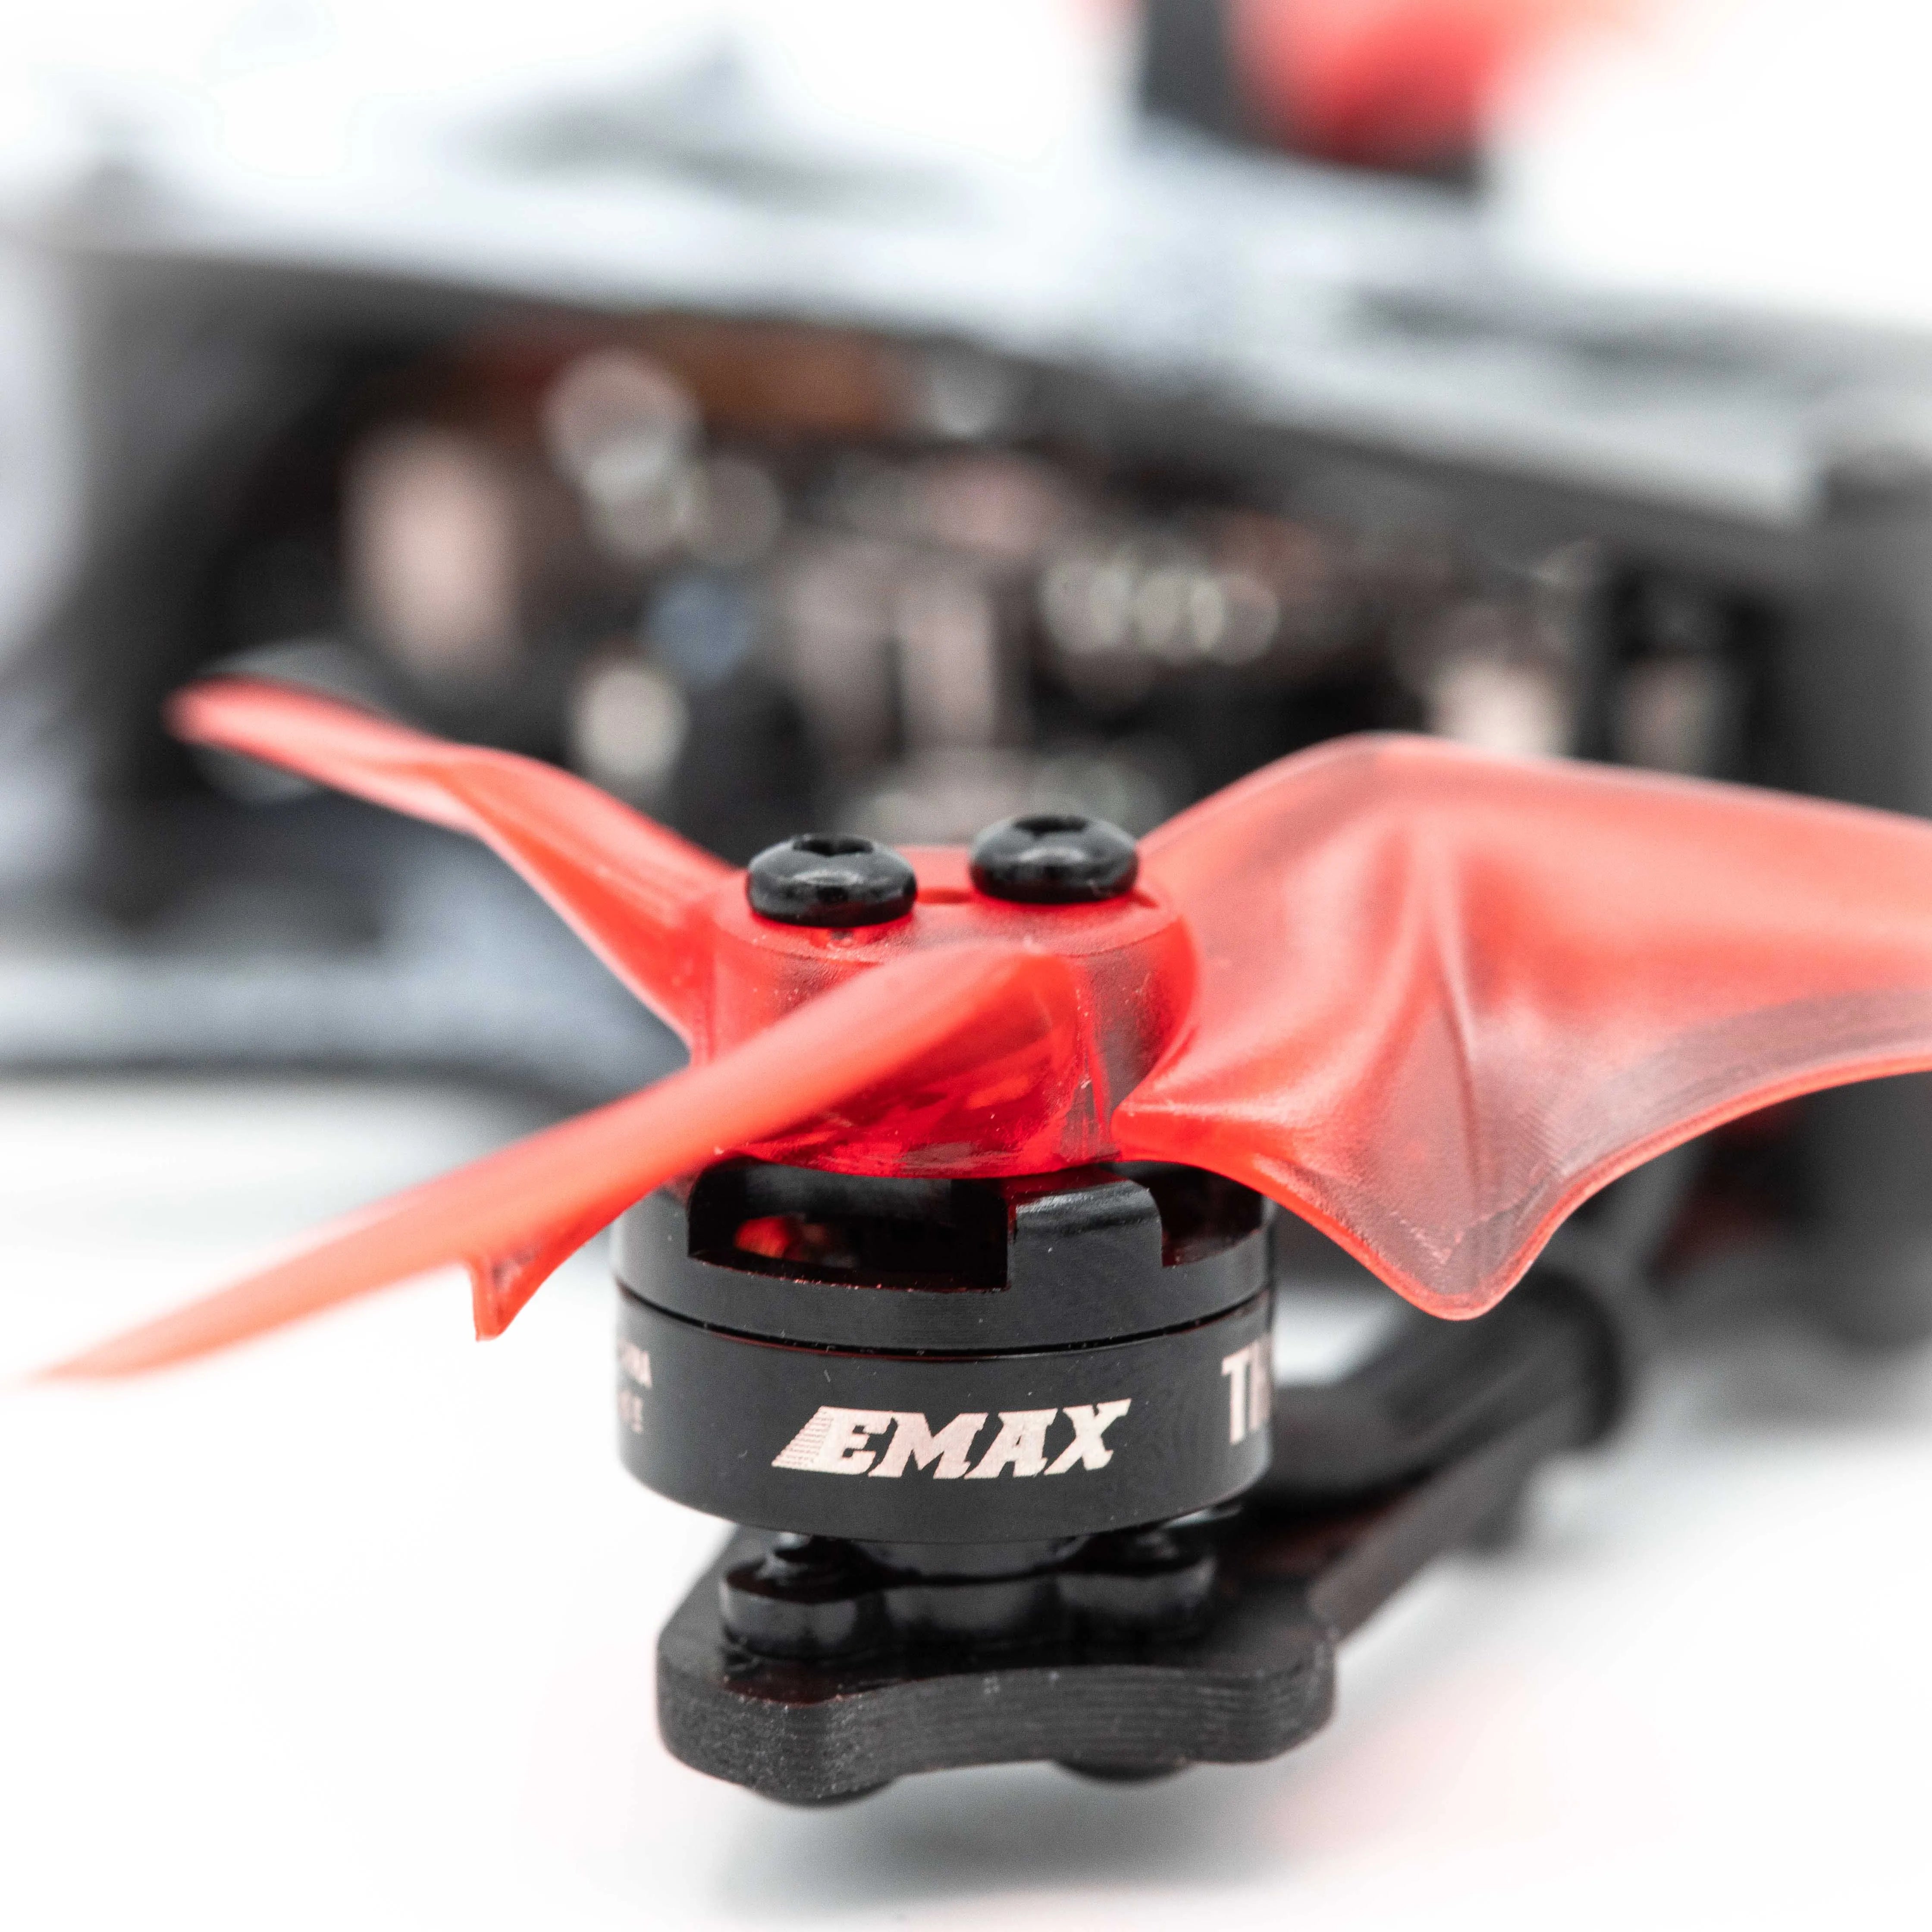 EMAX Tinyhawk Freestyle, in this review, we will dive into the specifications, included accessories, and performance capabilities of the